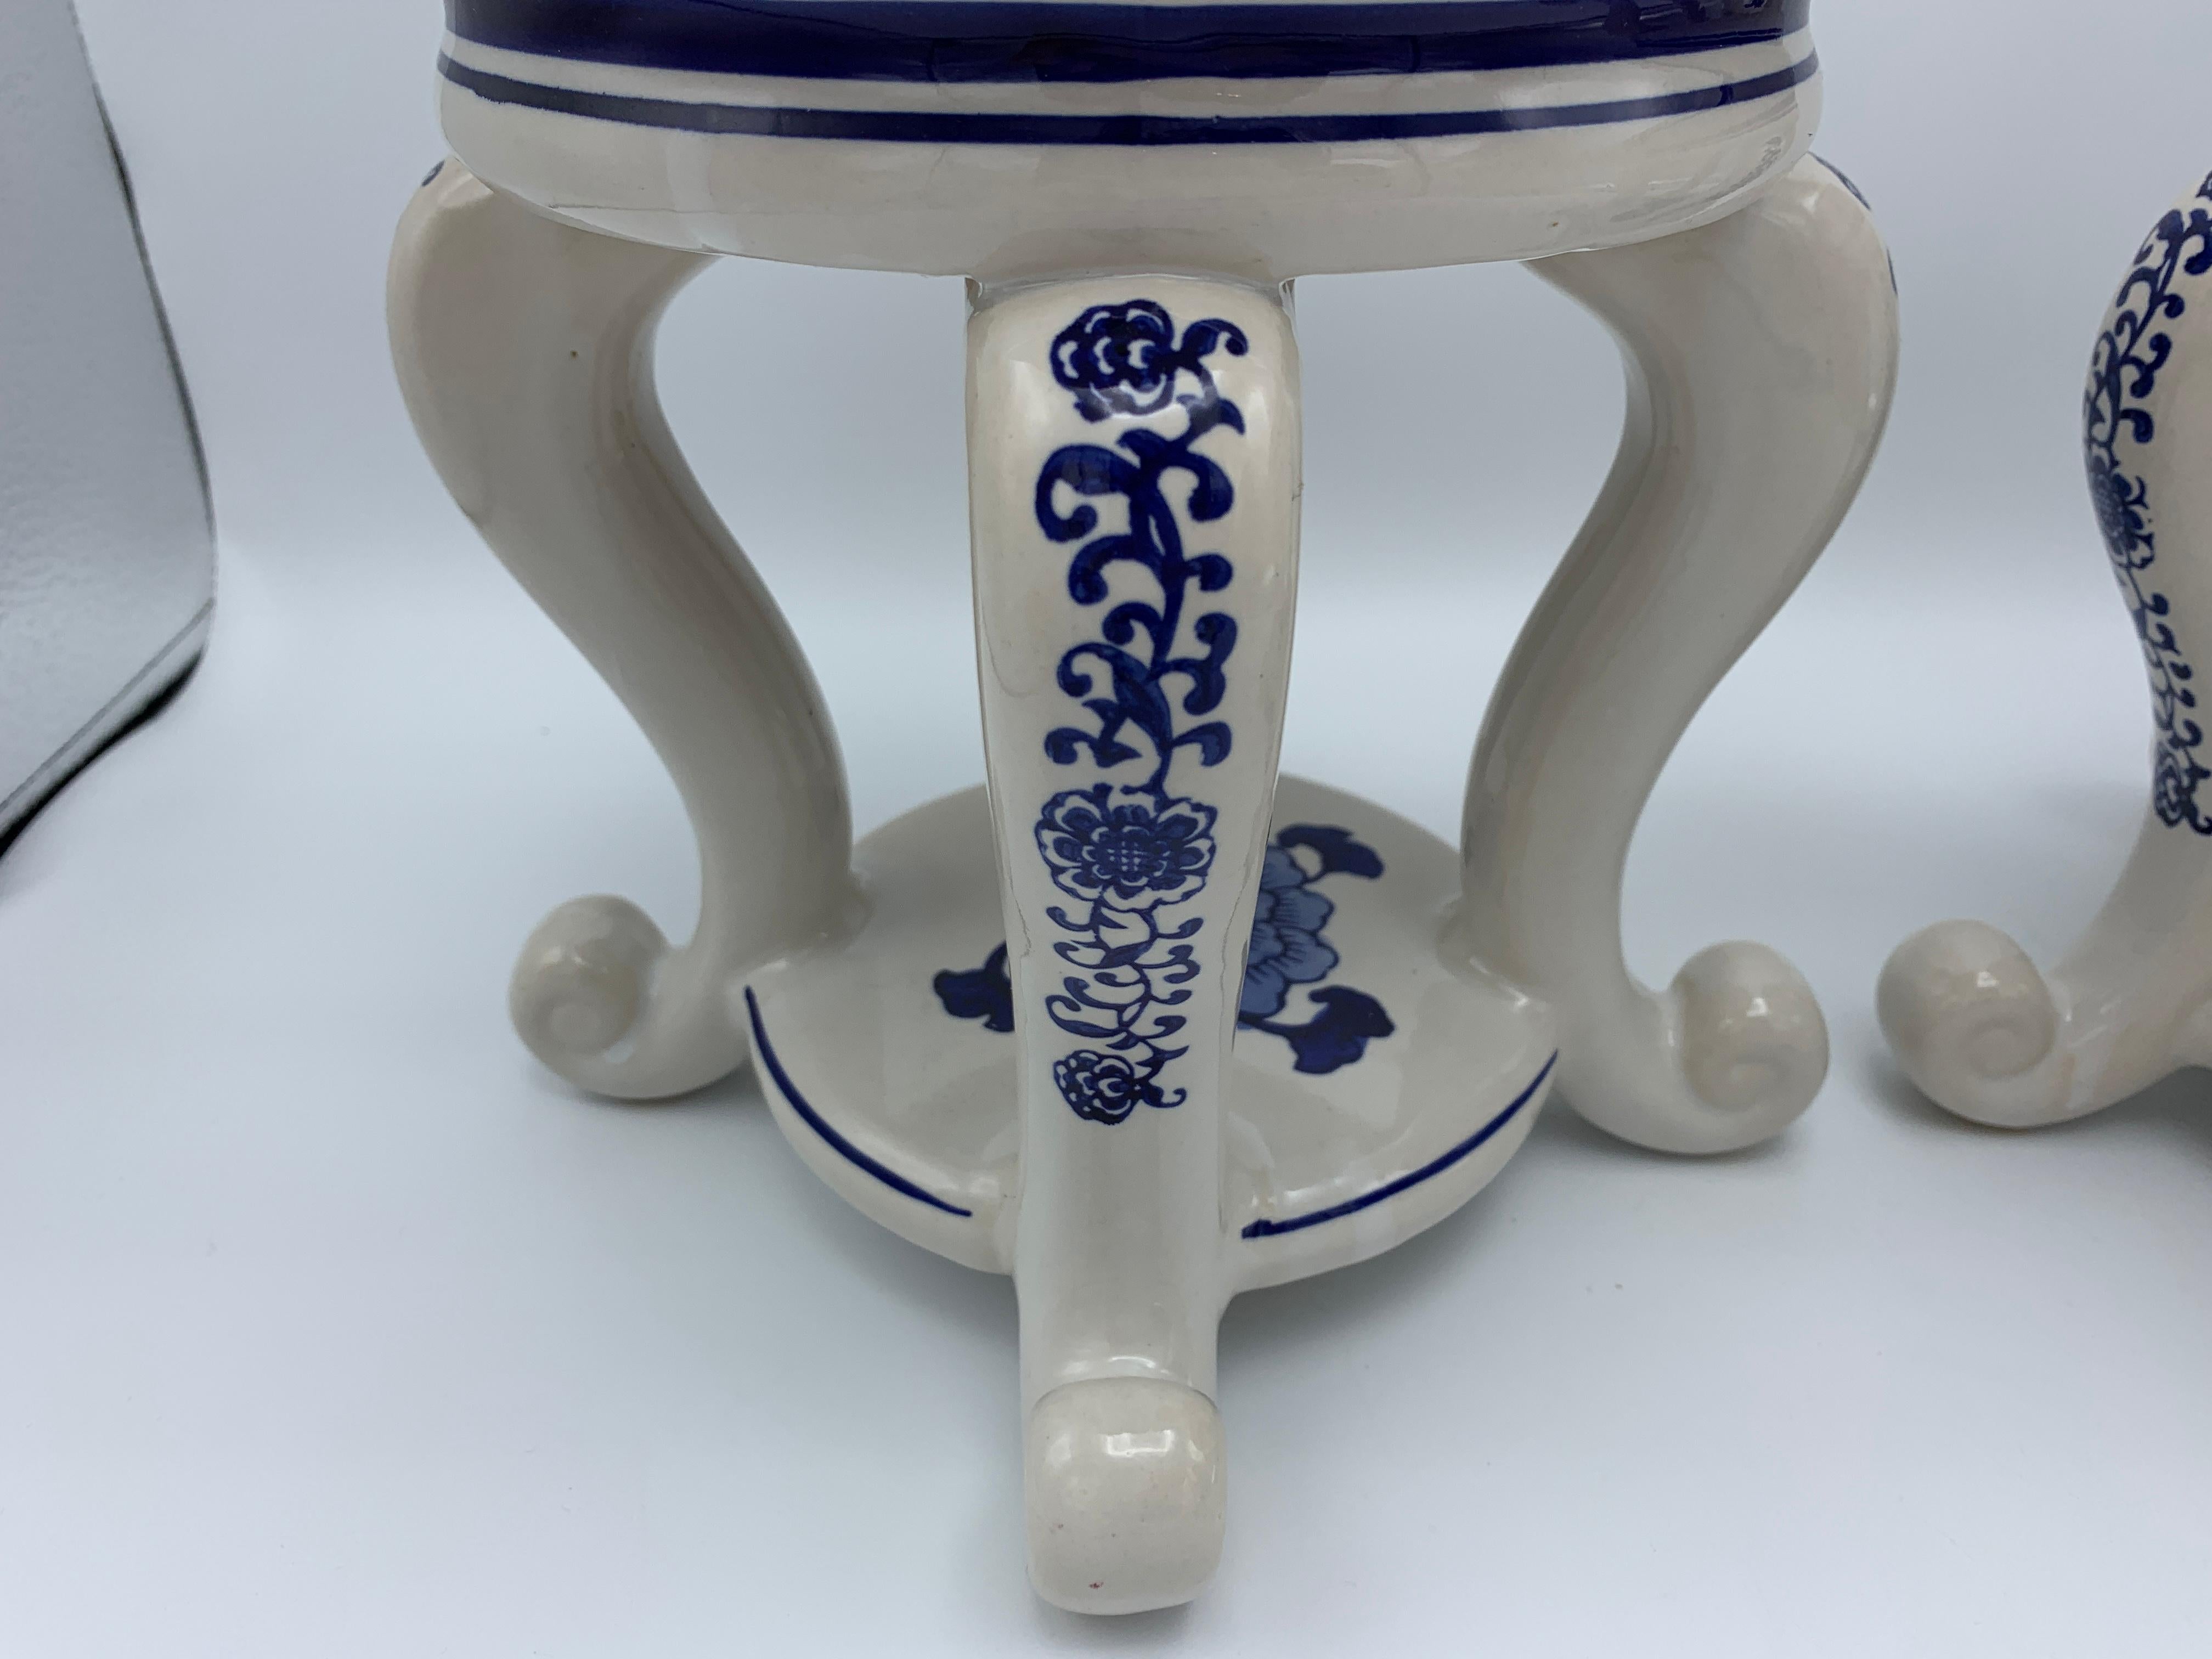 20th Century 1980s Chinoiserie Blue and White Ceramic Plant Stands with Peony Motif, Pair For Sale